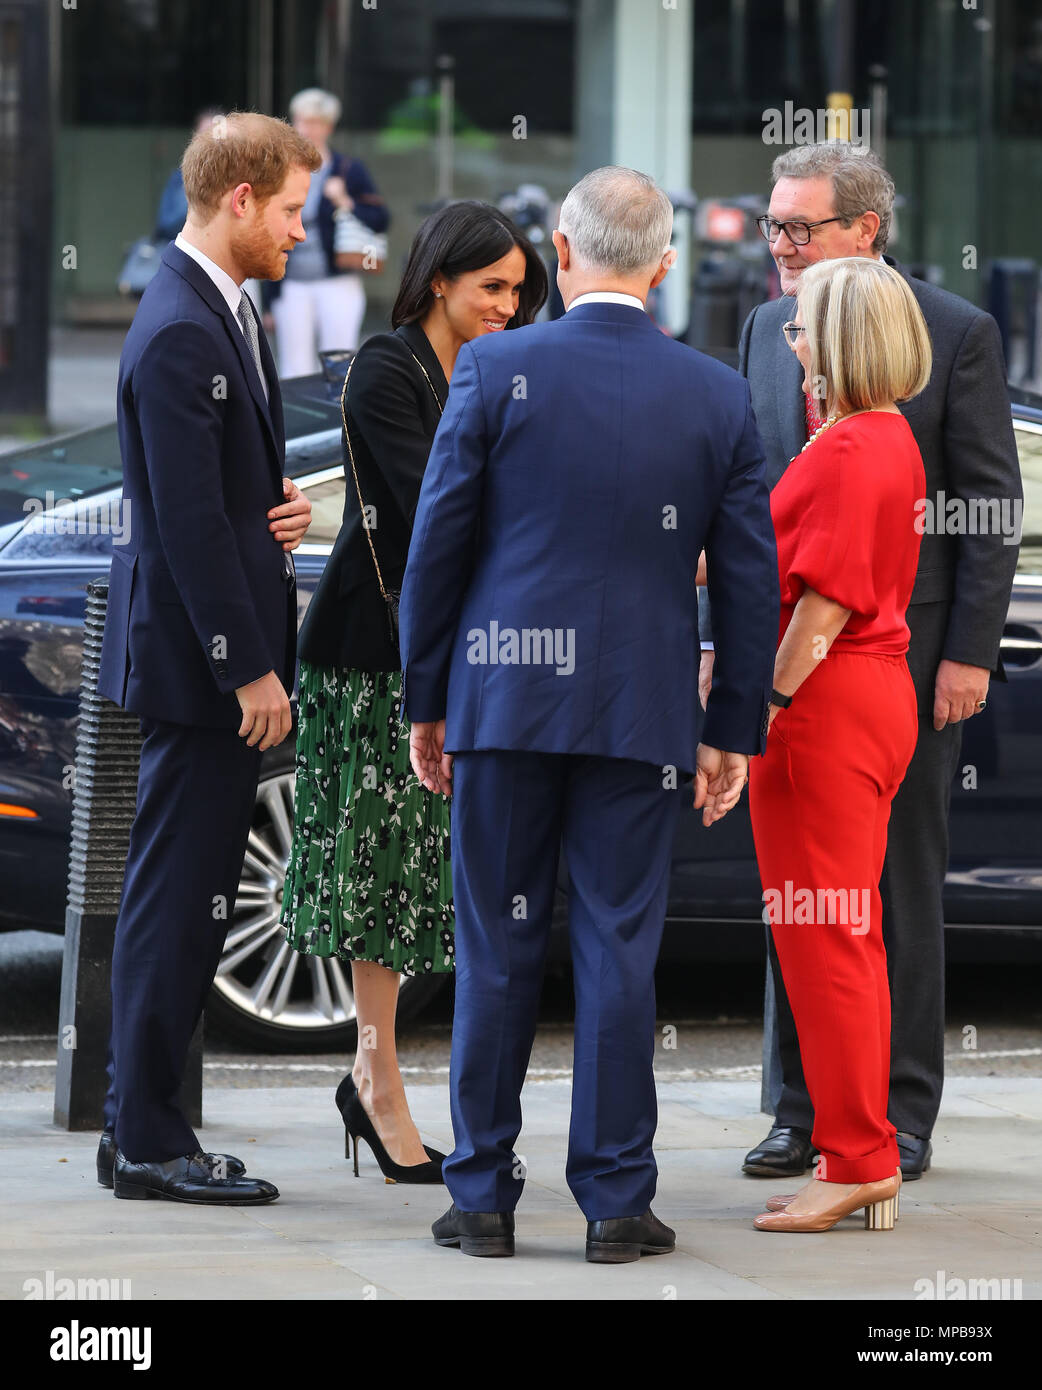 Prince Harry and Meghan Markle arrive at Australia House in London to meet with the Australian High Commissioner in the lead up to Invictus Games.  Featuring: Meghan Markle, Prince Harry, Malcolm Turnbull, Lucy Turnbull, Alexander Downer Where: London, United Kingdom When: 21 Apr 2018 Credit: John Rainford/WENN.com Stock Photo